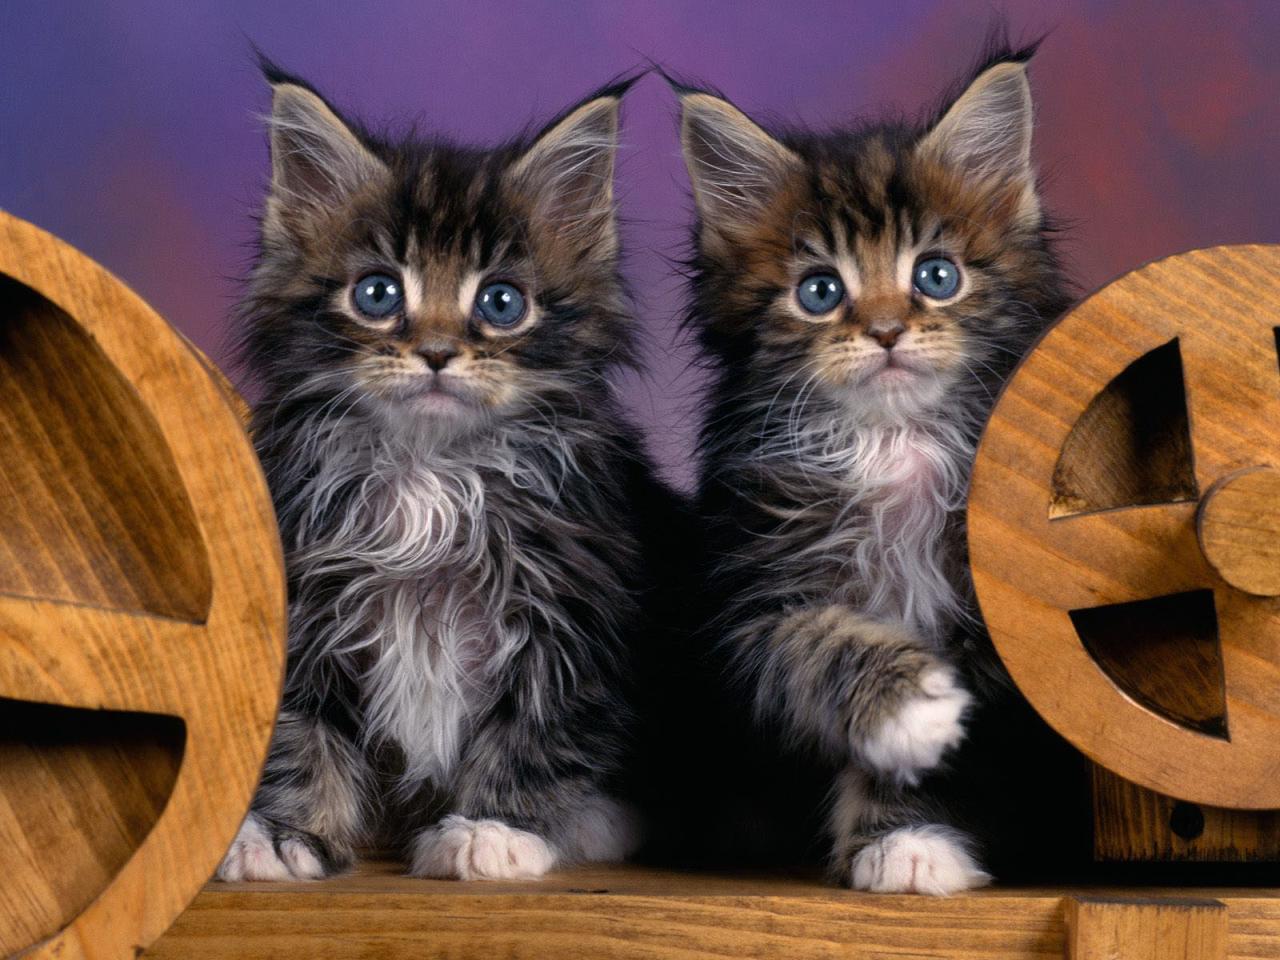 Adorable maine coon kittens